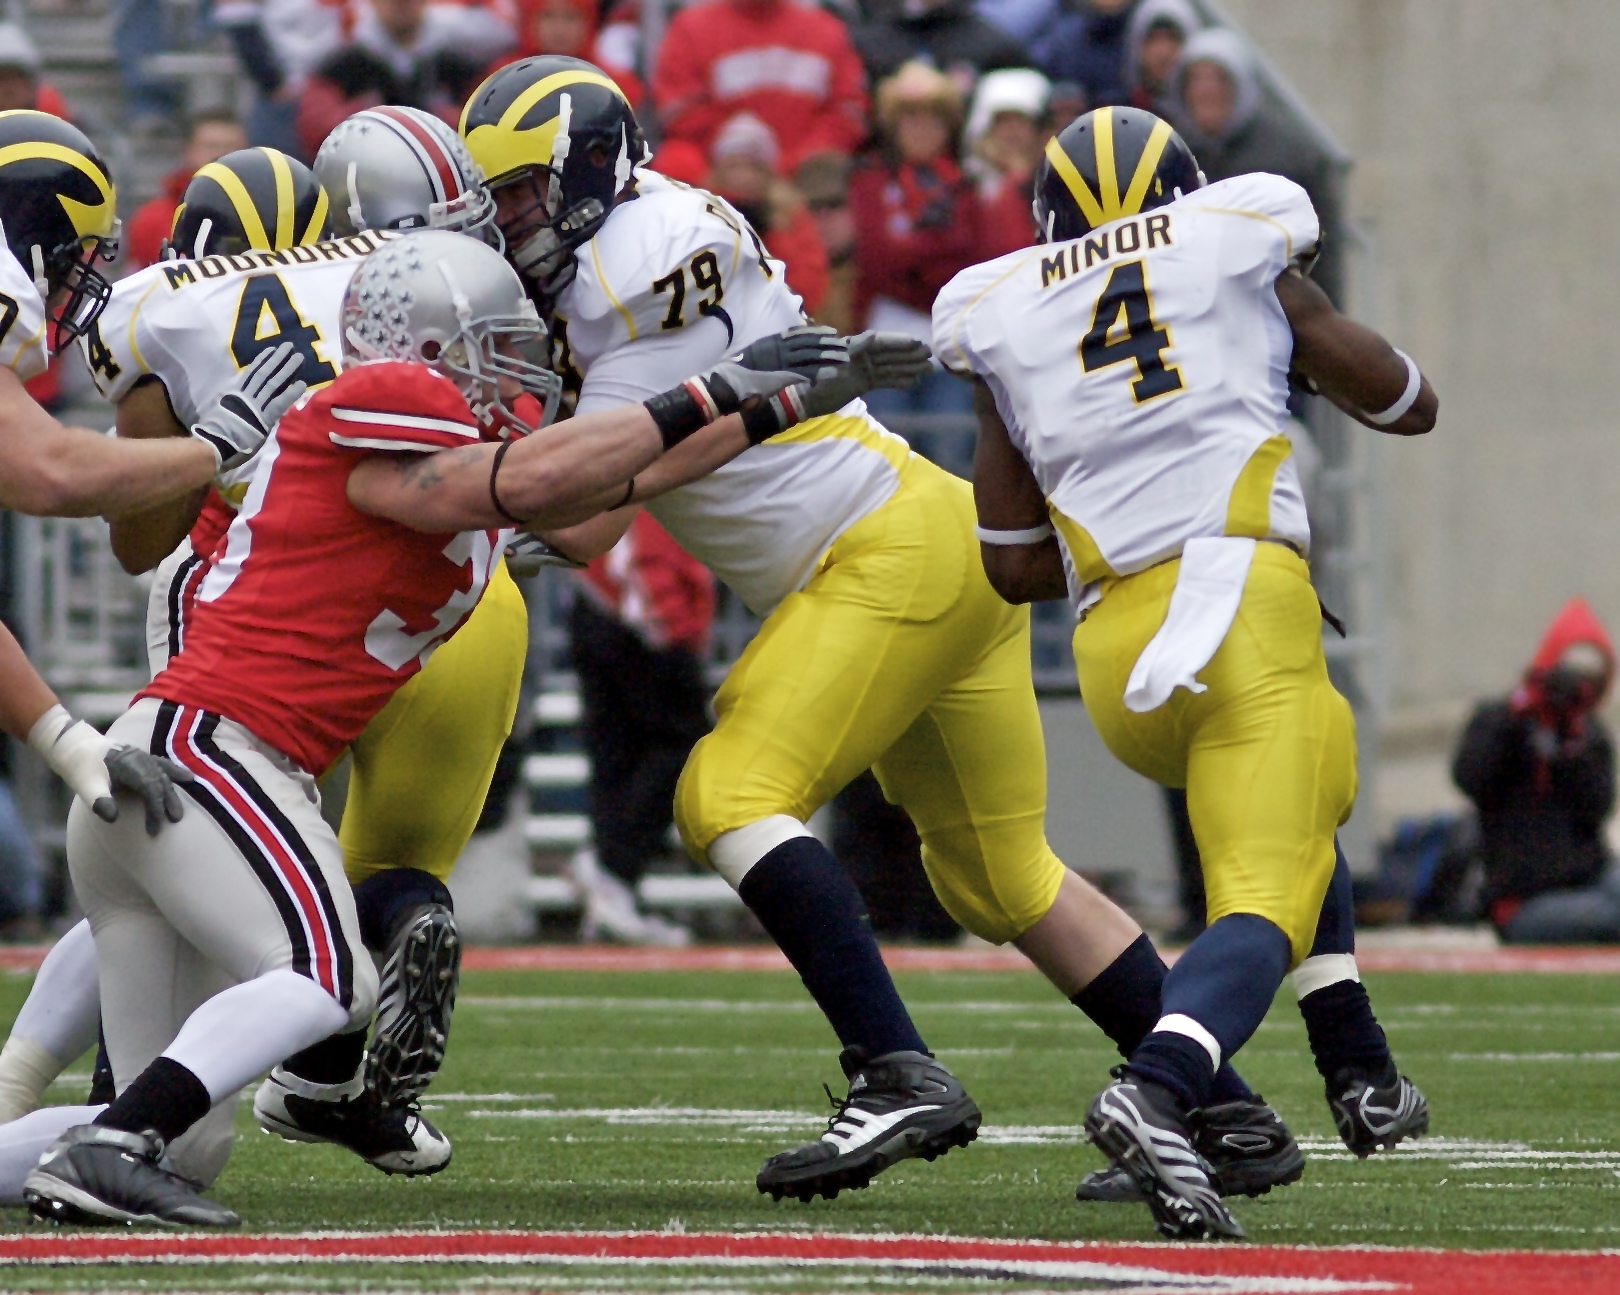 A game between The University of Michigan and The Ohio State University, members of the Big Ten Conference, one of the Power Five conferences.